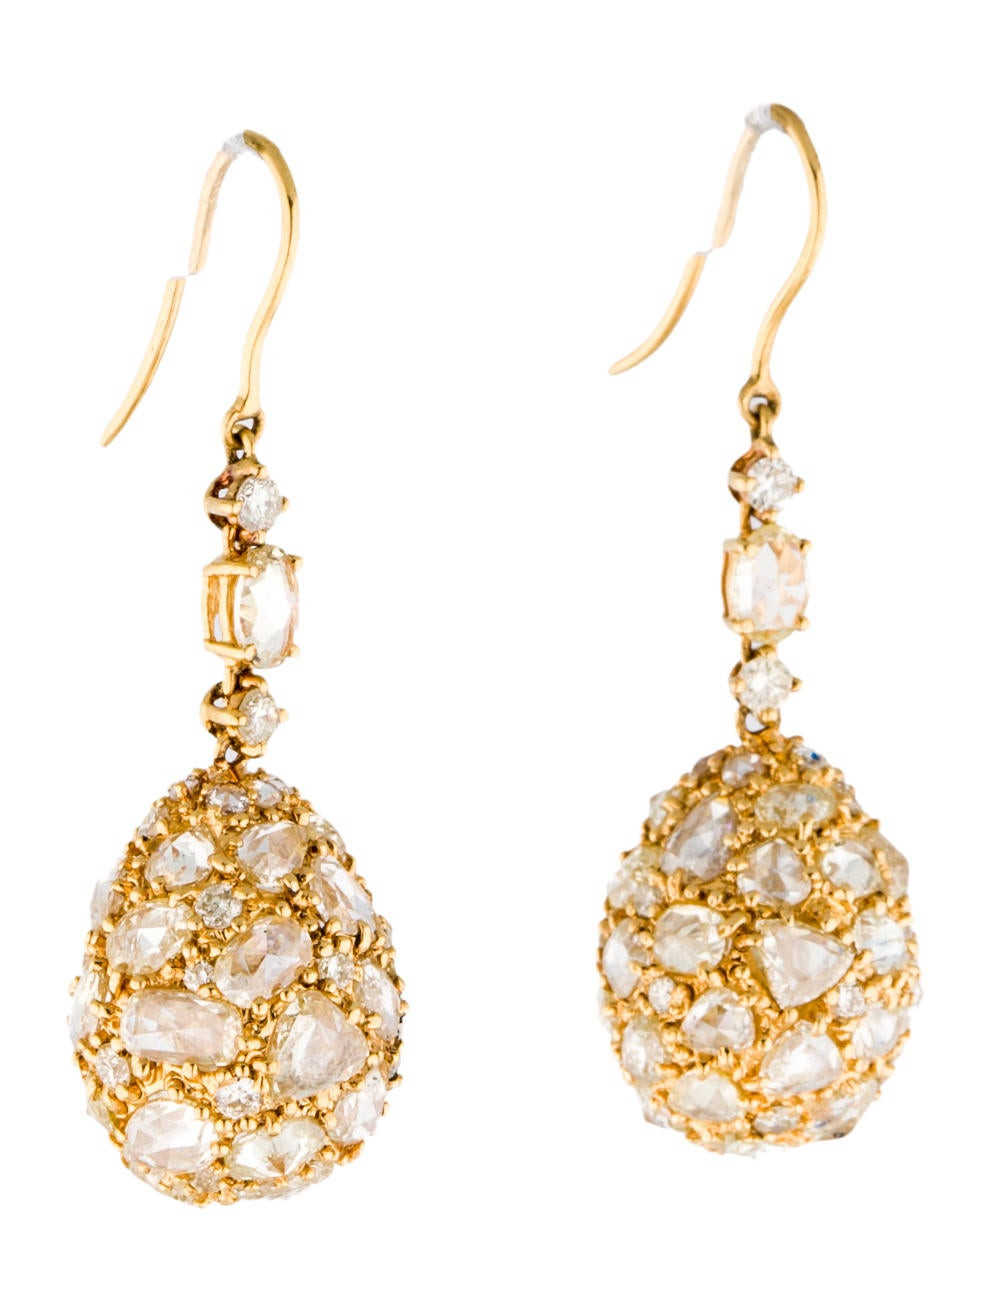 Diamond Ball Earrings
 Diamond Ball Earrings Earrings FJE